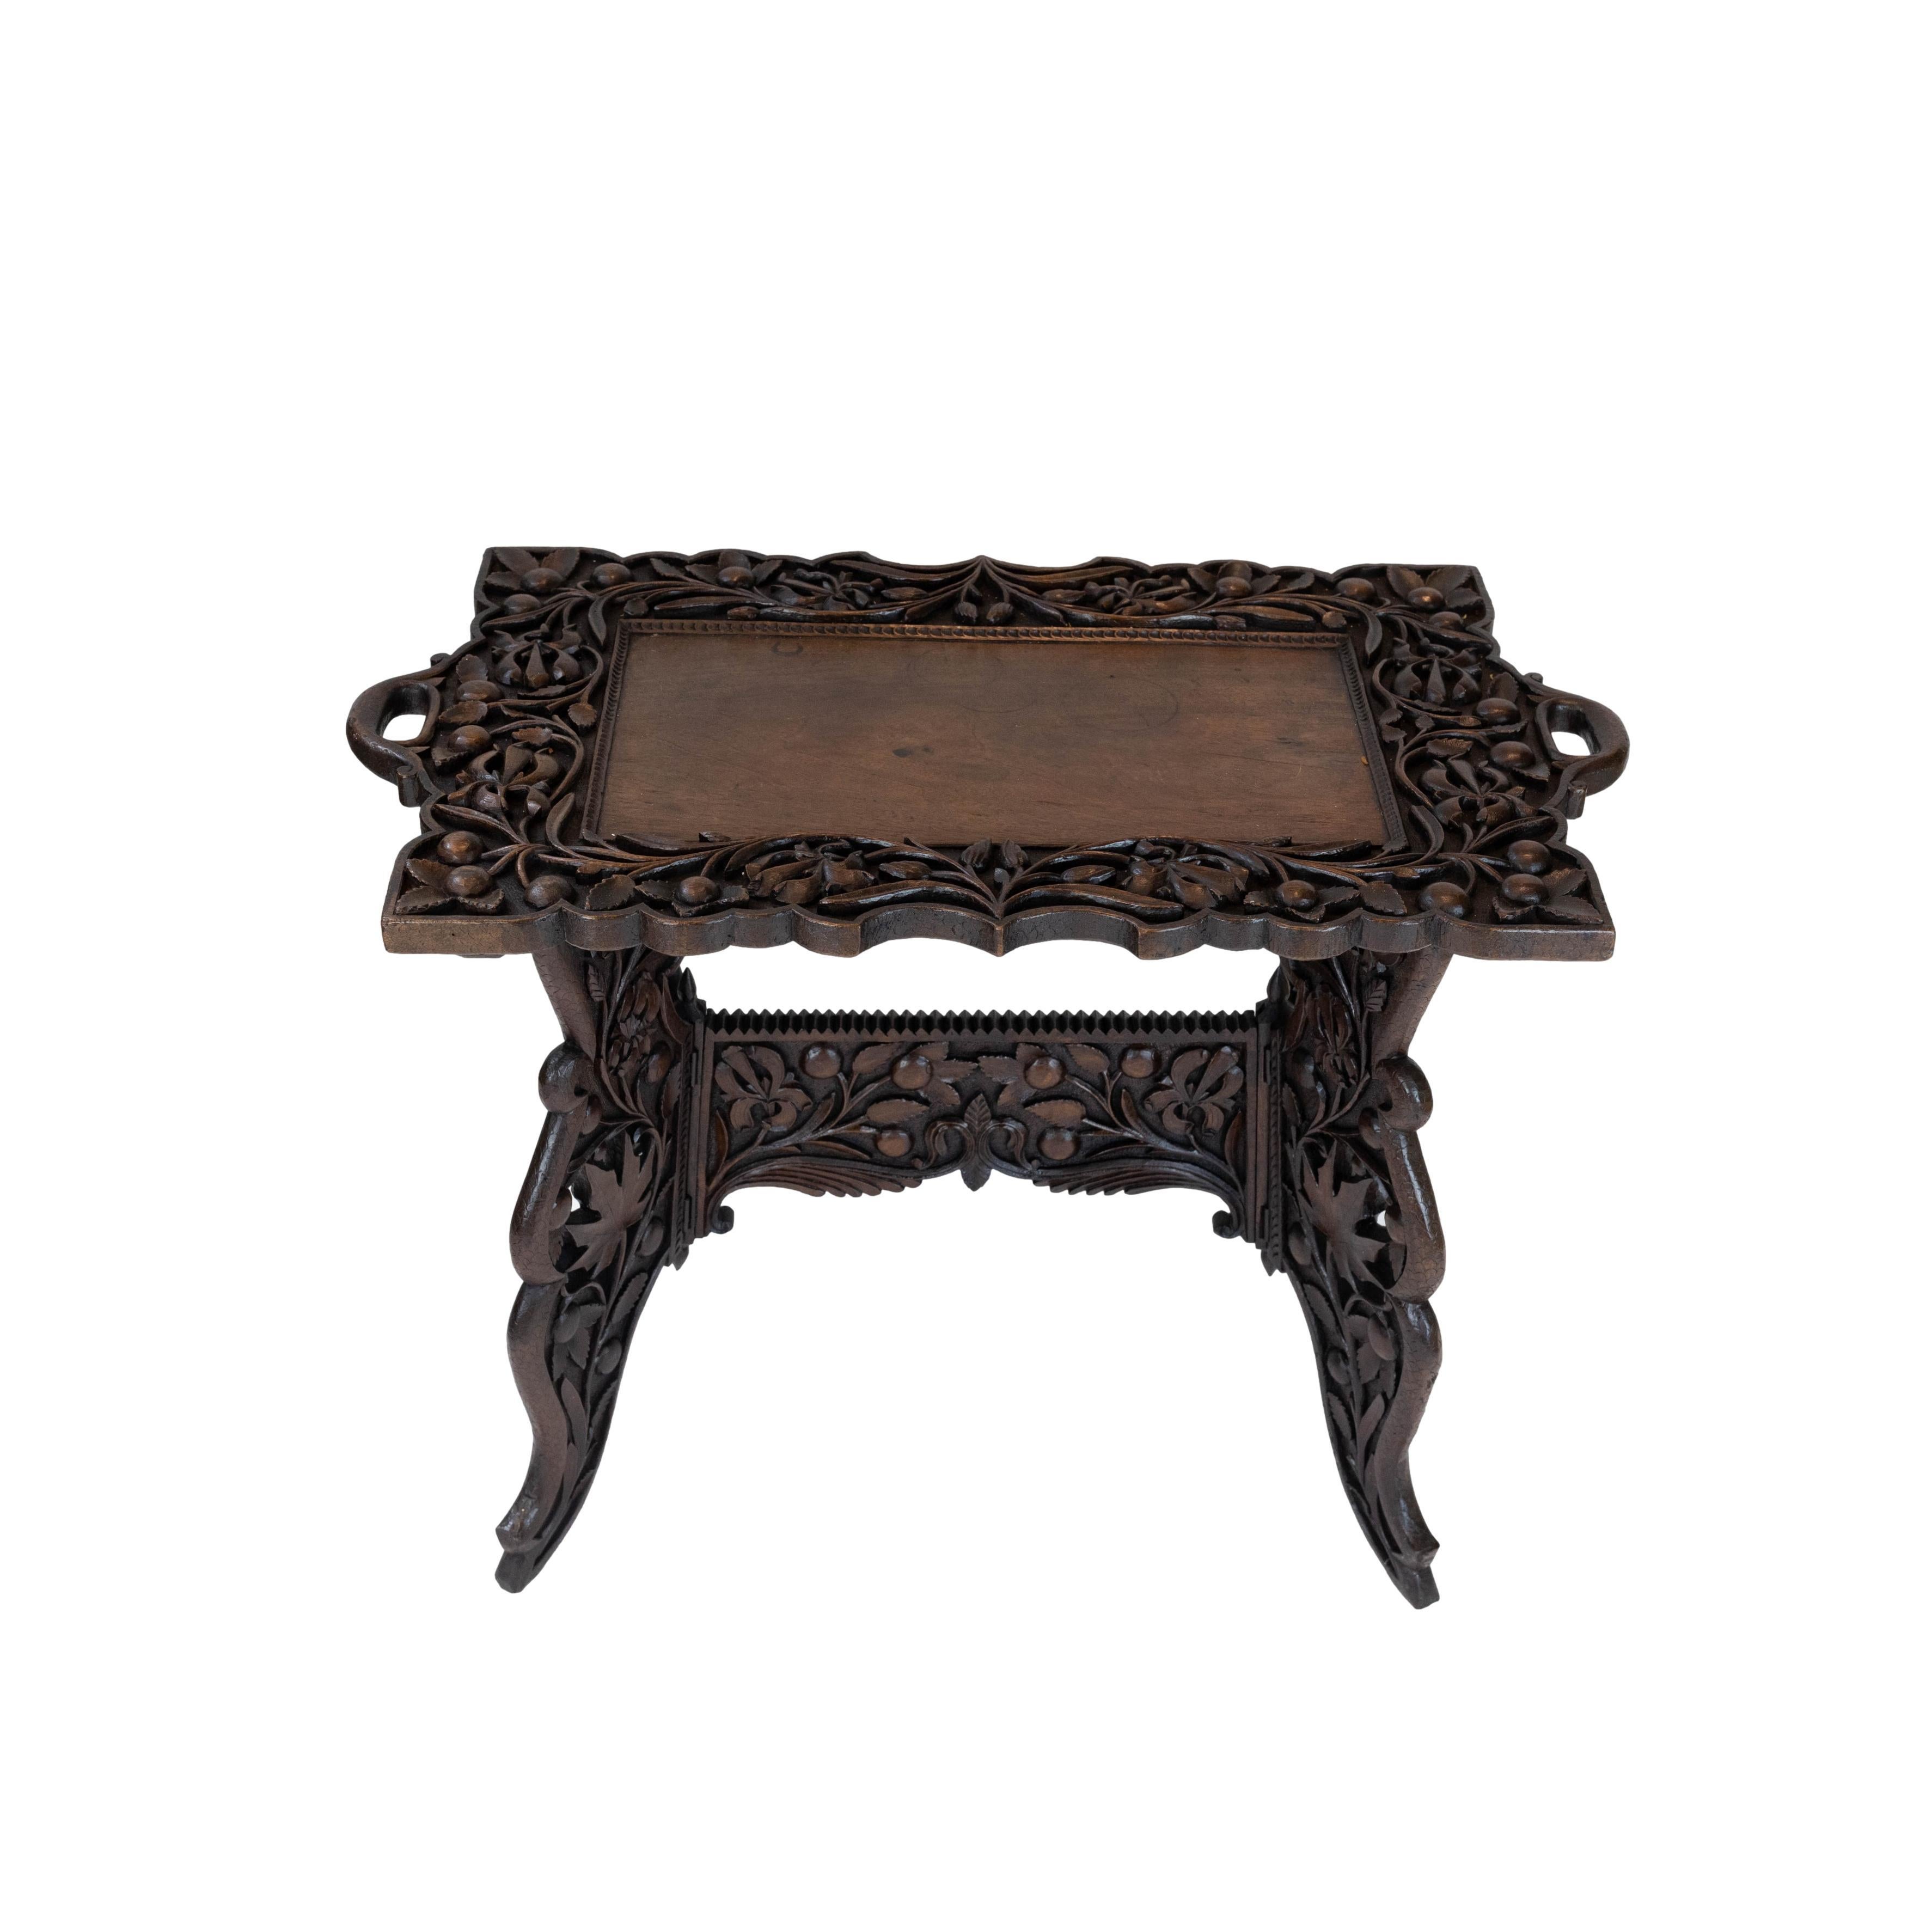 Elaborately hand-carved solid walnut campaign tray-top table, English, ca. 1890, with naturalistically carved cherries and leaves, either side with filigreed maple leaves. Originally made as a collapsable campaign piece, the frame and top are now